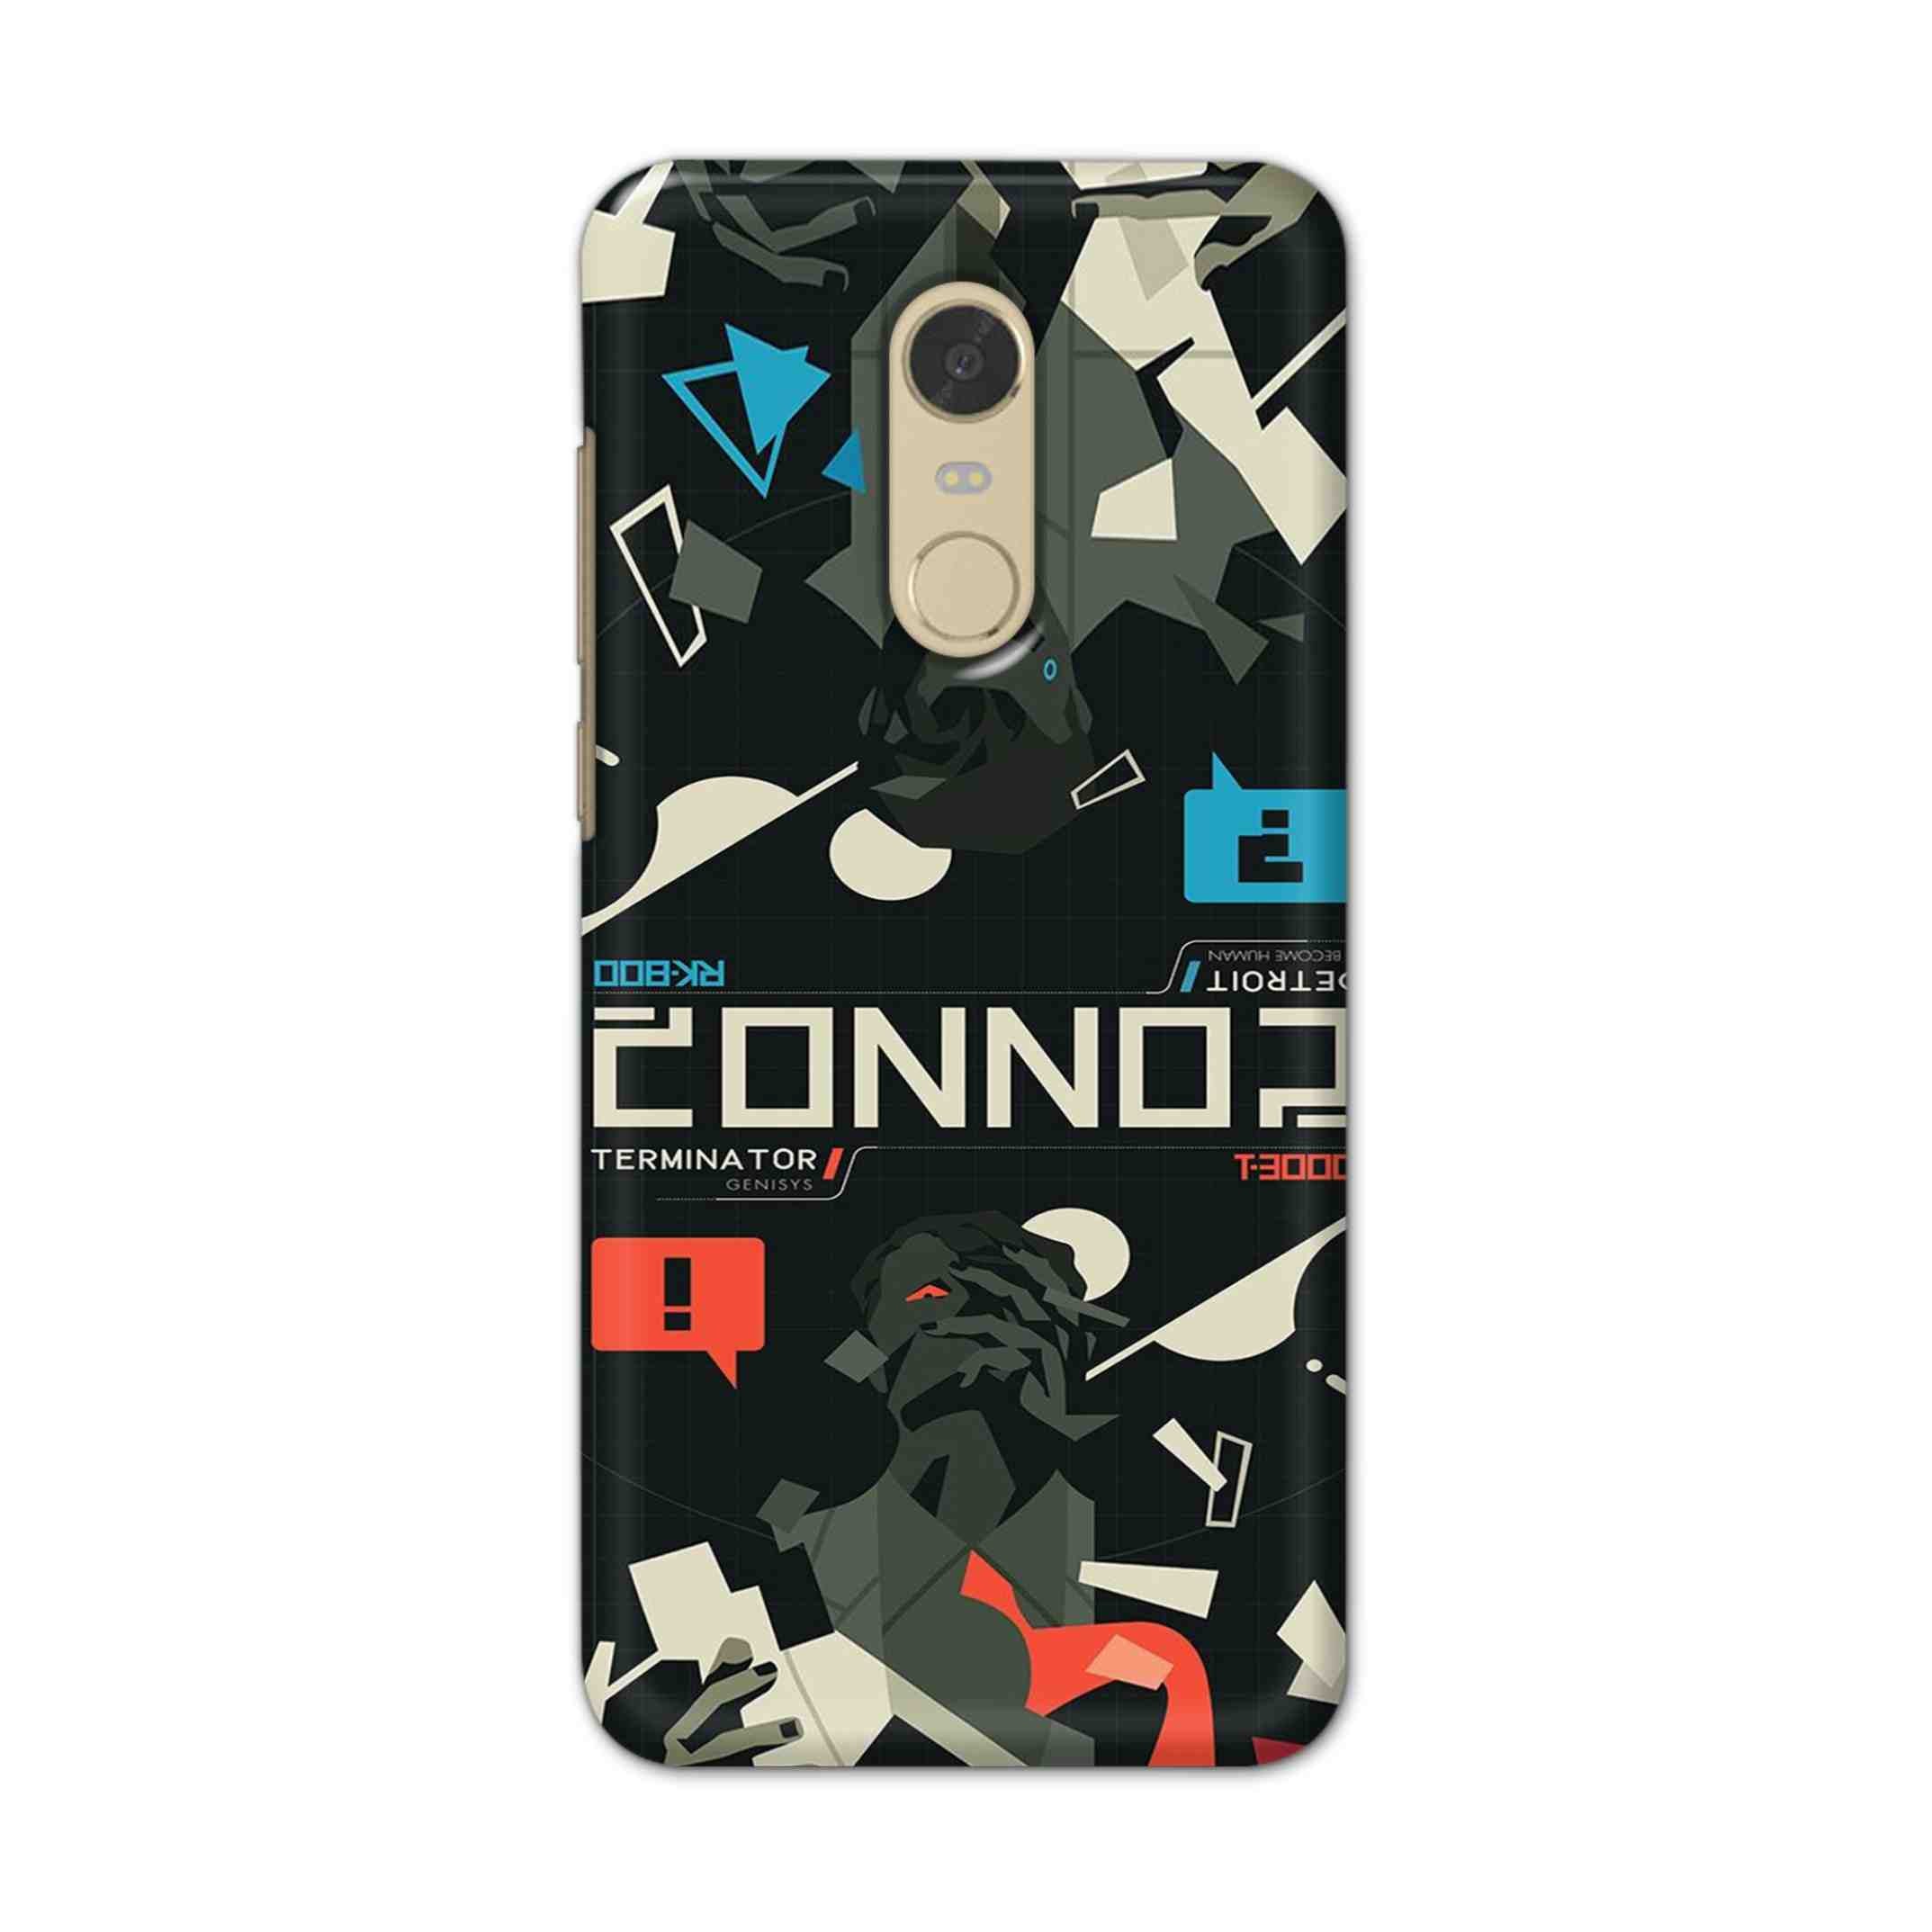 Buy Terminator Hard Back Mobile Phone Case/Cover For Redmi Note 6 Online